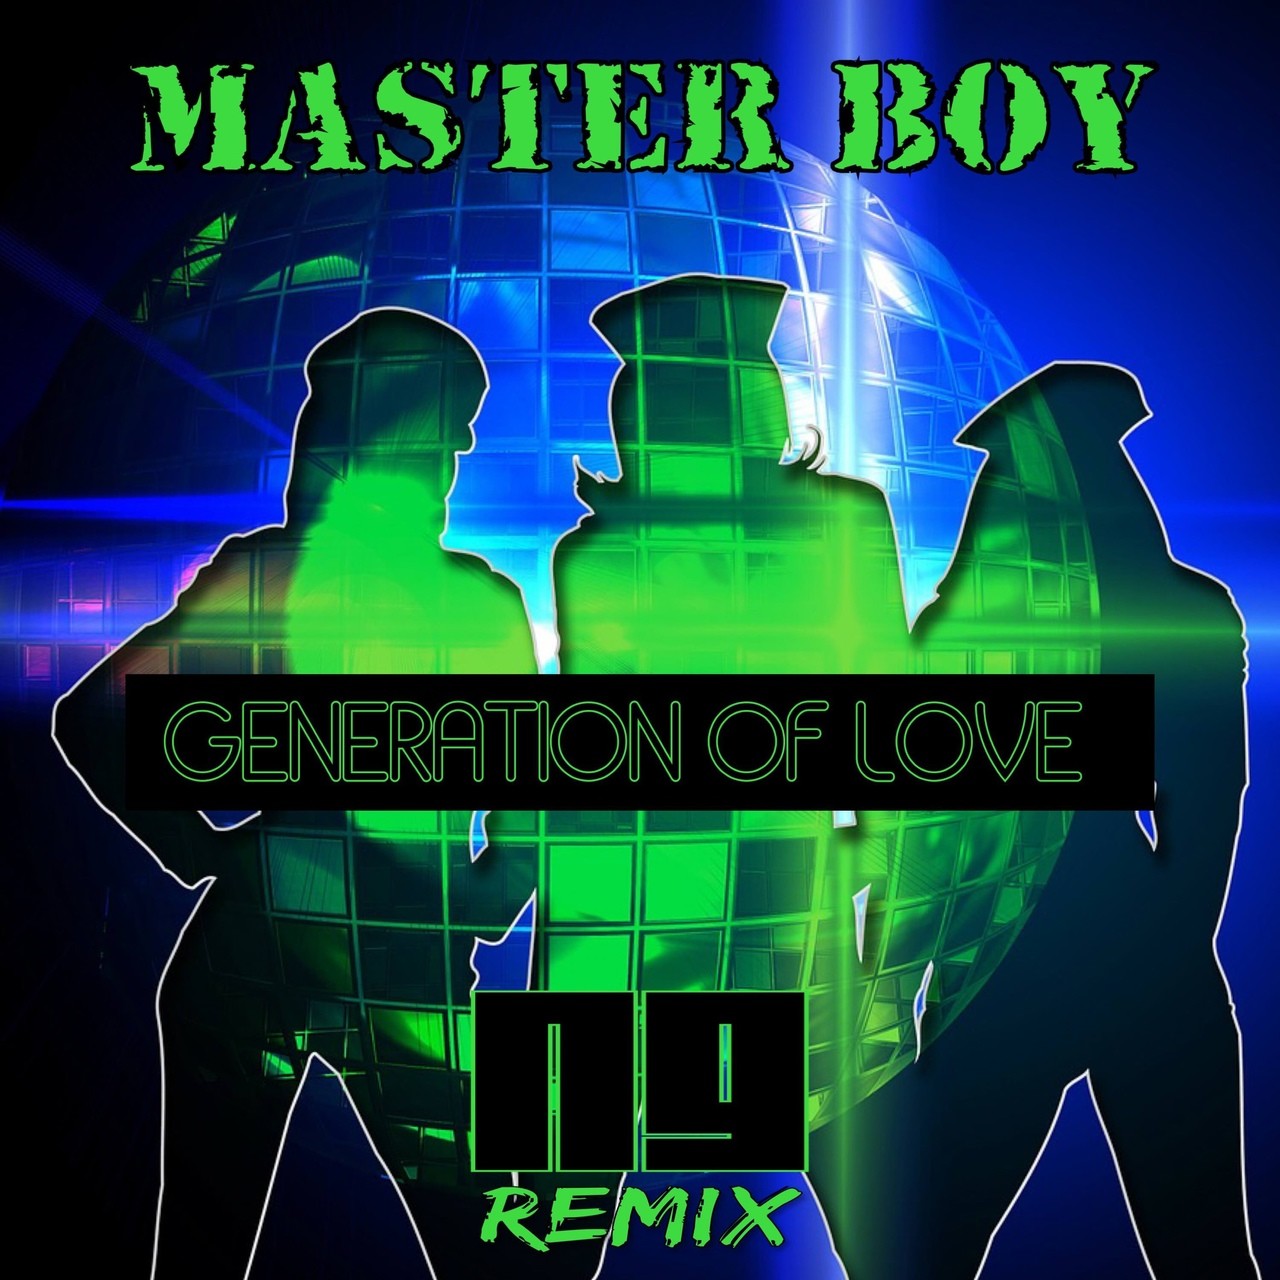 Obsession ng remix. Masterboy - "Generation of Love" винил. Masterboy Generation of Love.